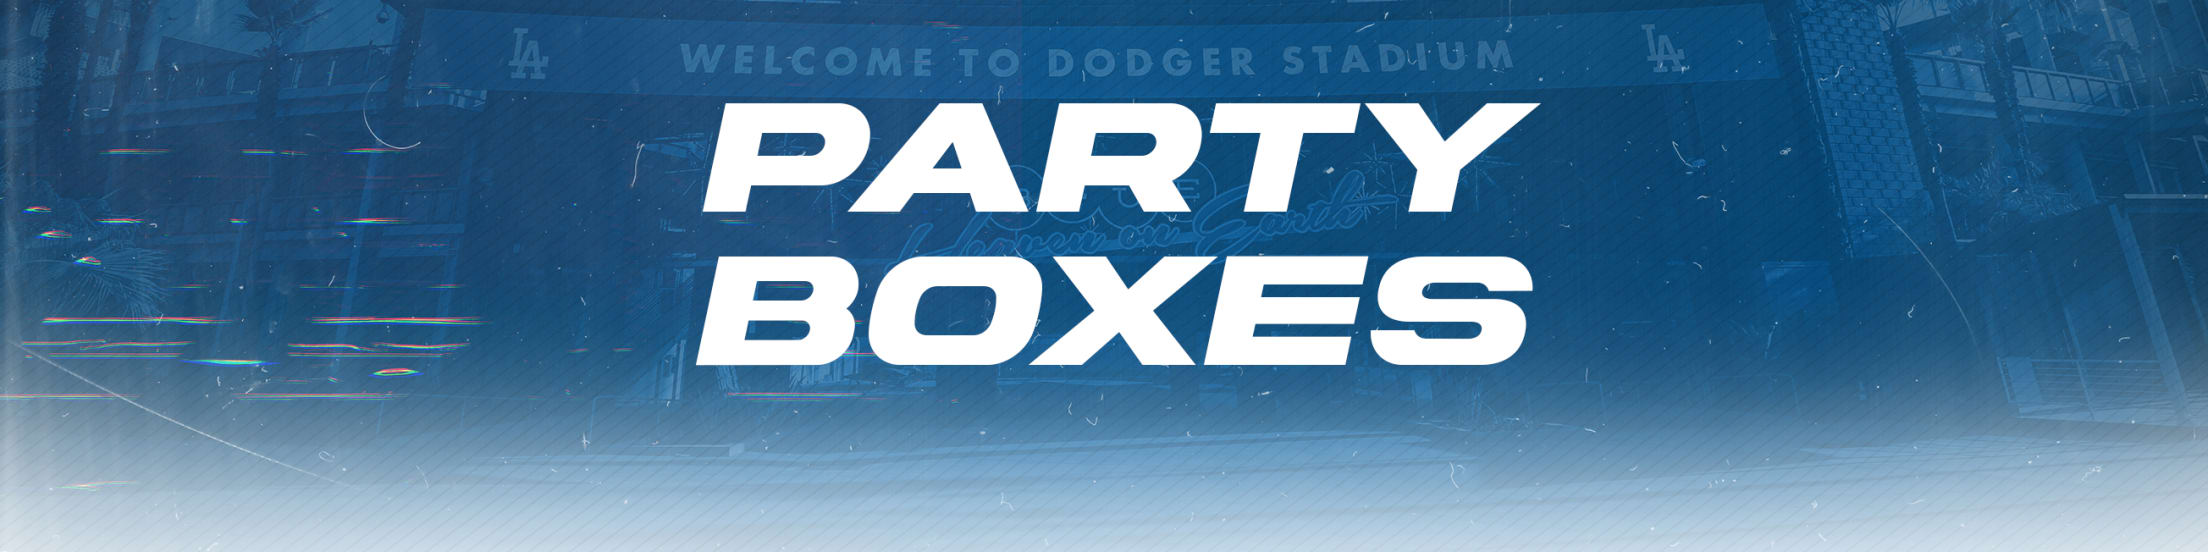 Los Angeles Dodgers Ticket Packages, 2019 Special Event Games: Mexican  Heritage Night, Pups At The Park Lakers Night & More At Dodger Stadium